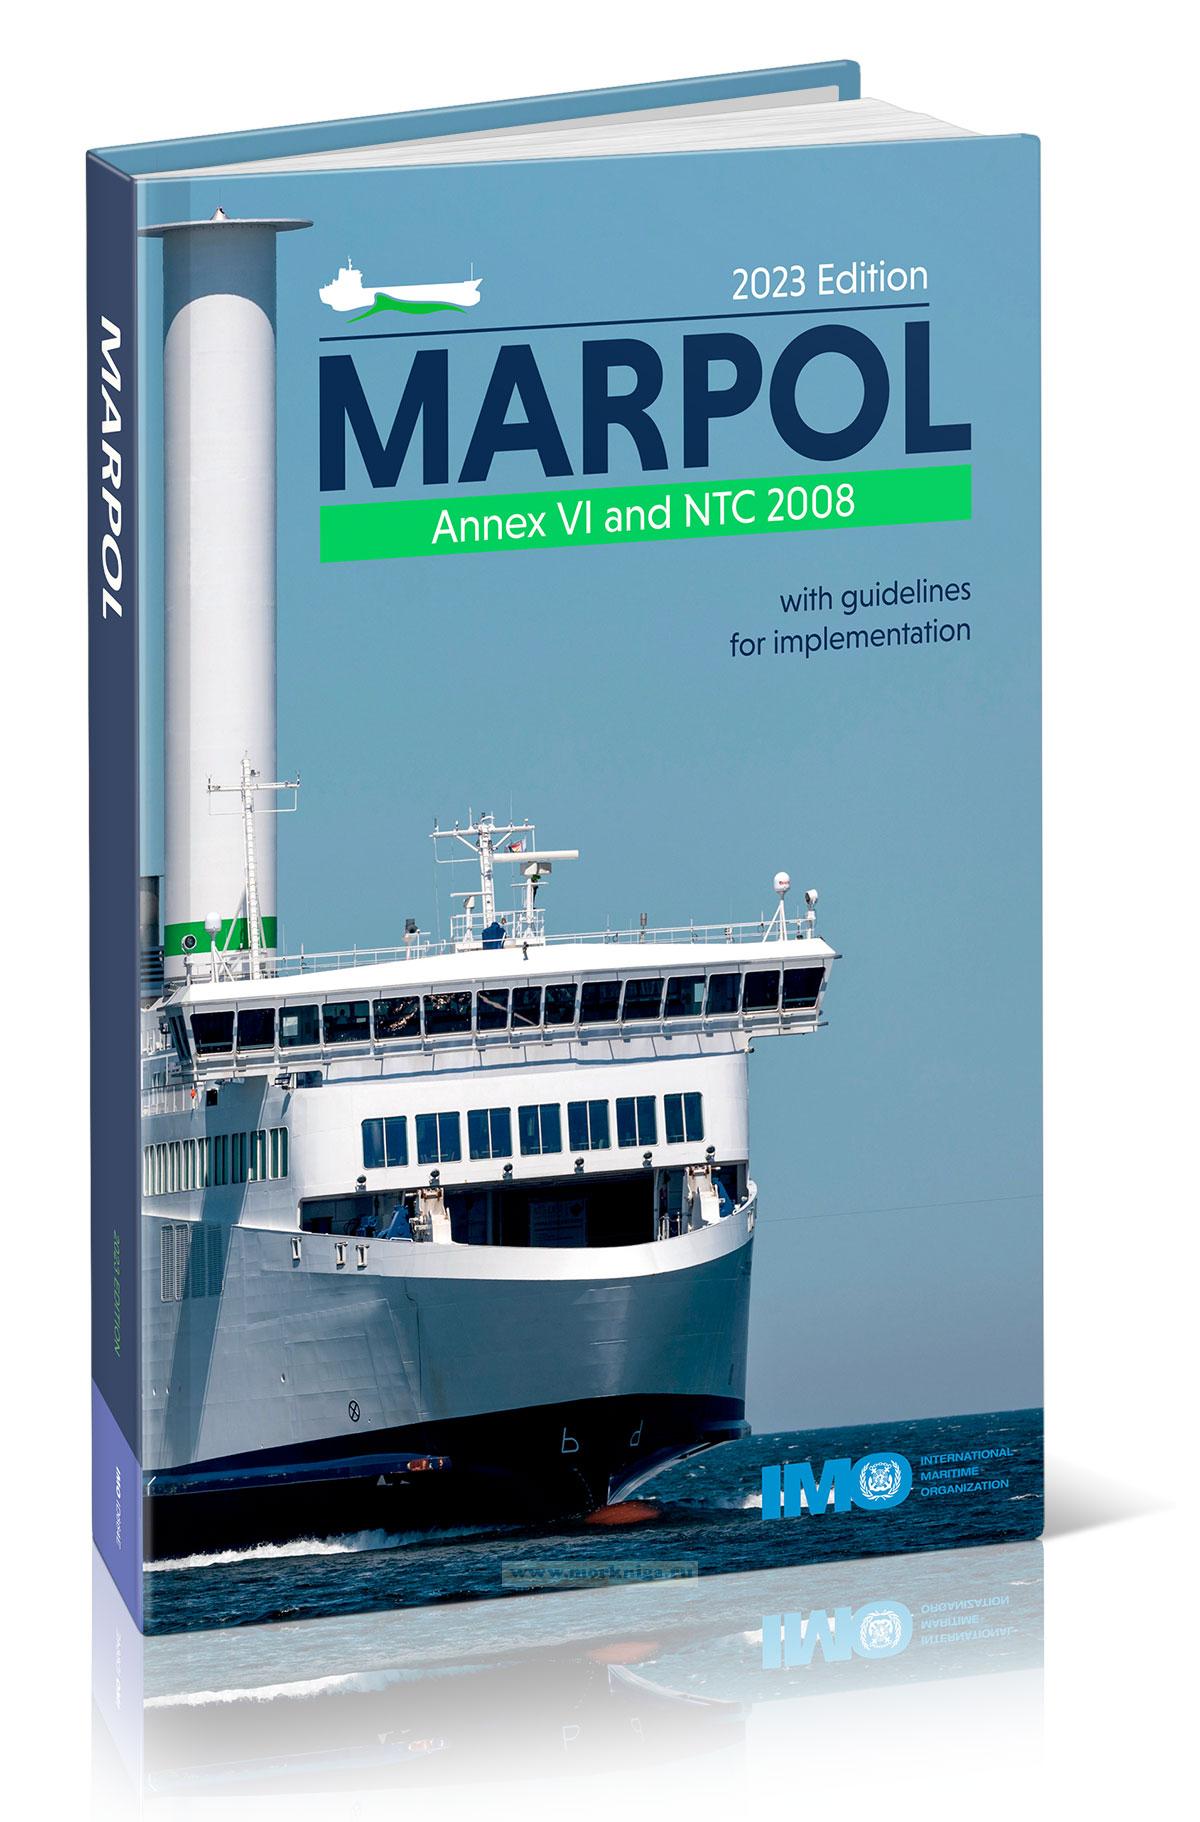 MARPOL Annex VI and NTC 2008 with guidelines for implementation. Edition 2023